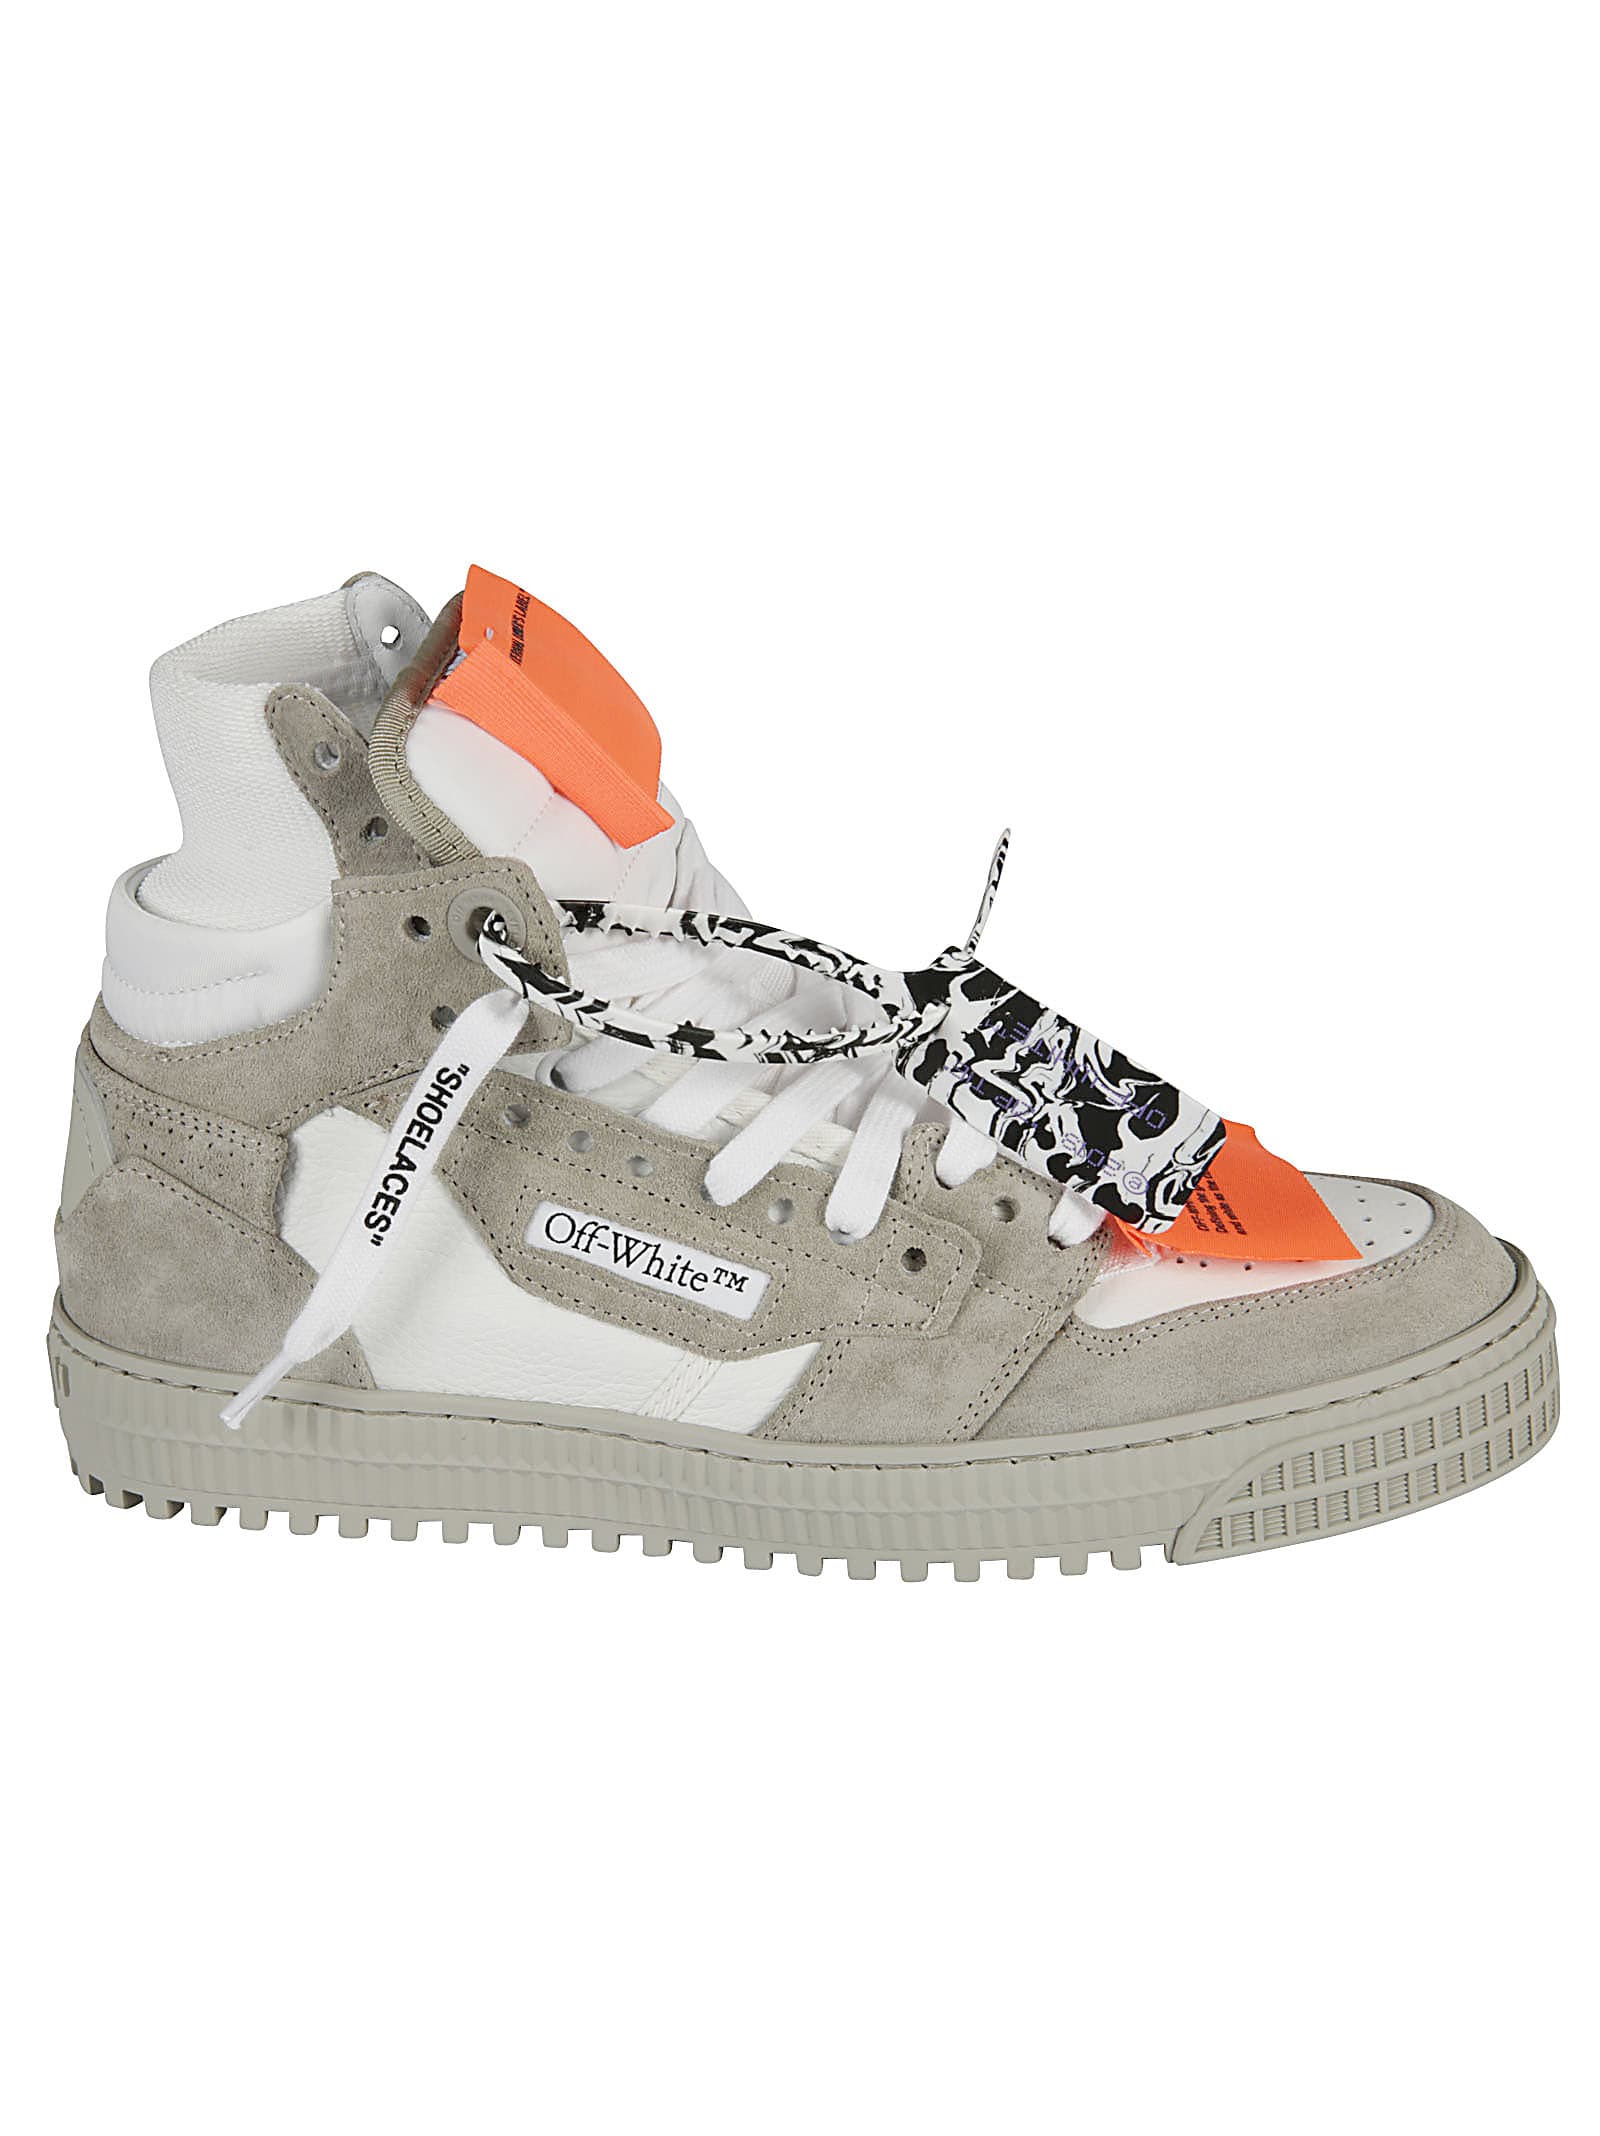 Off-White 3.0 Off-court Leather Boots